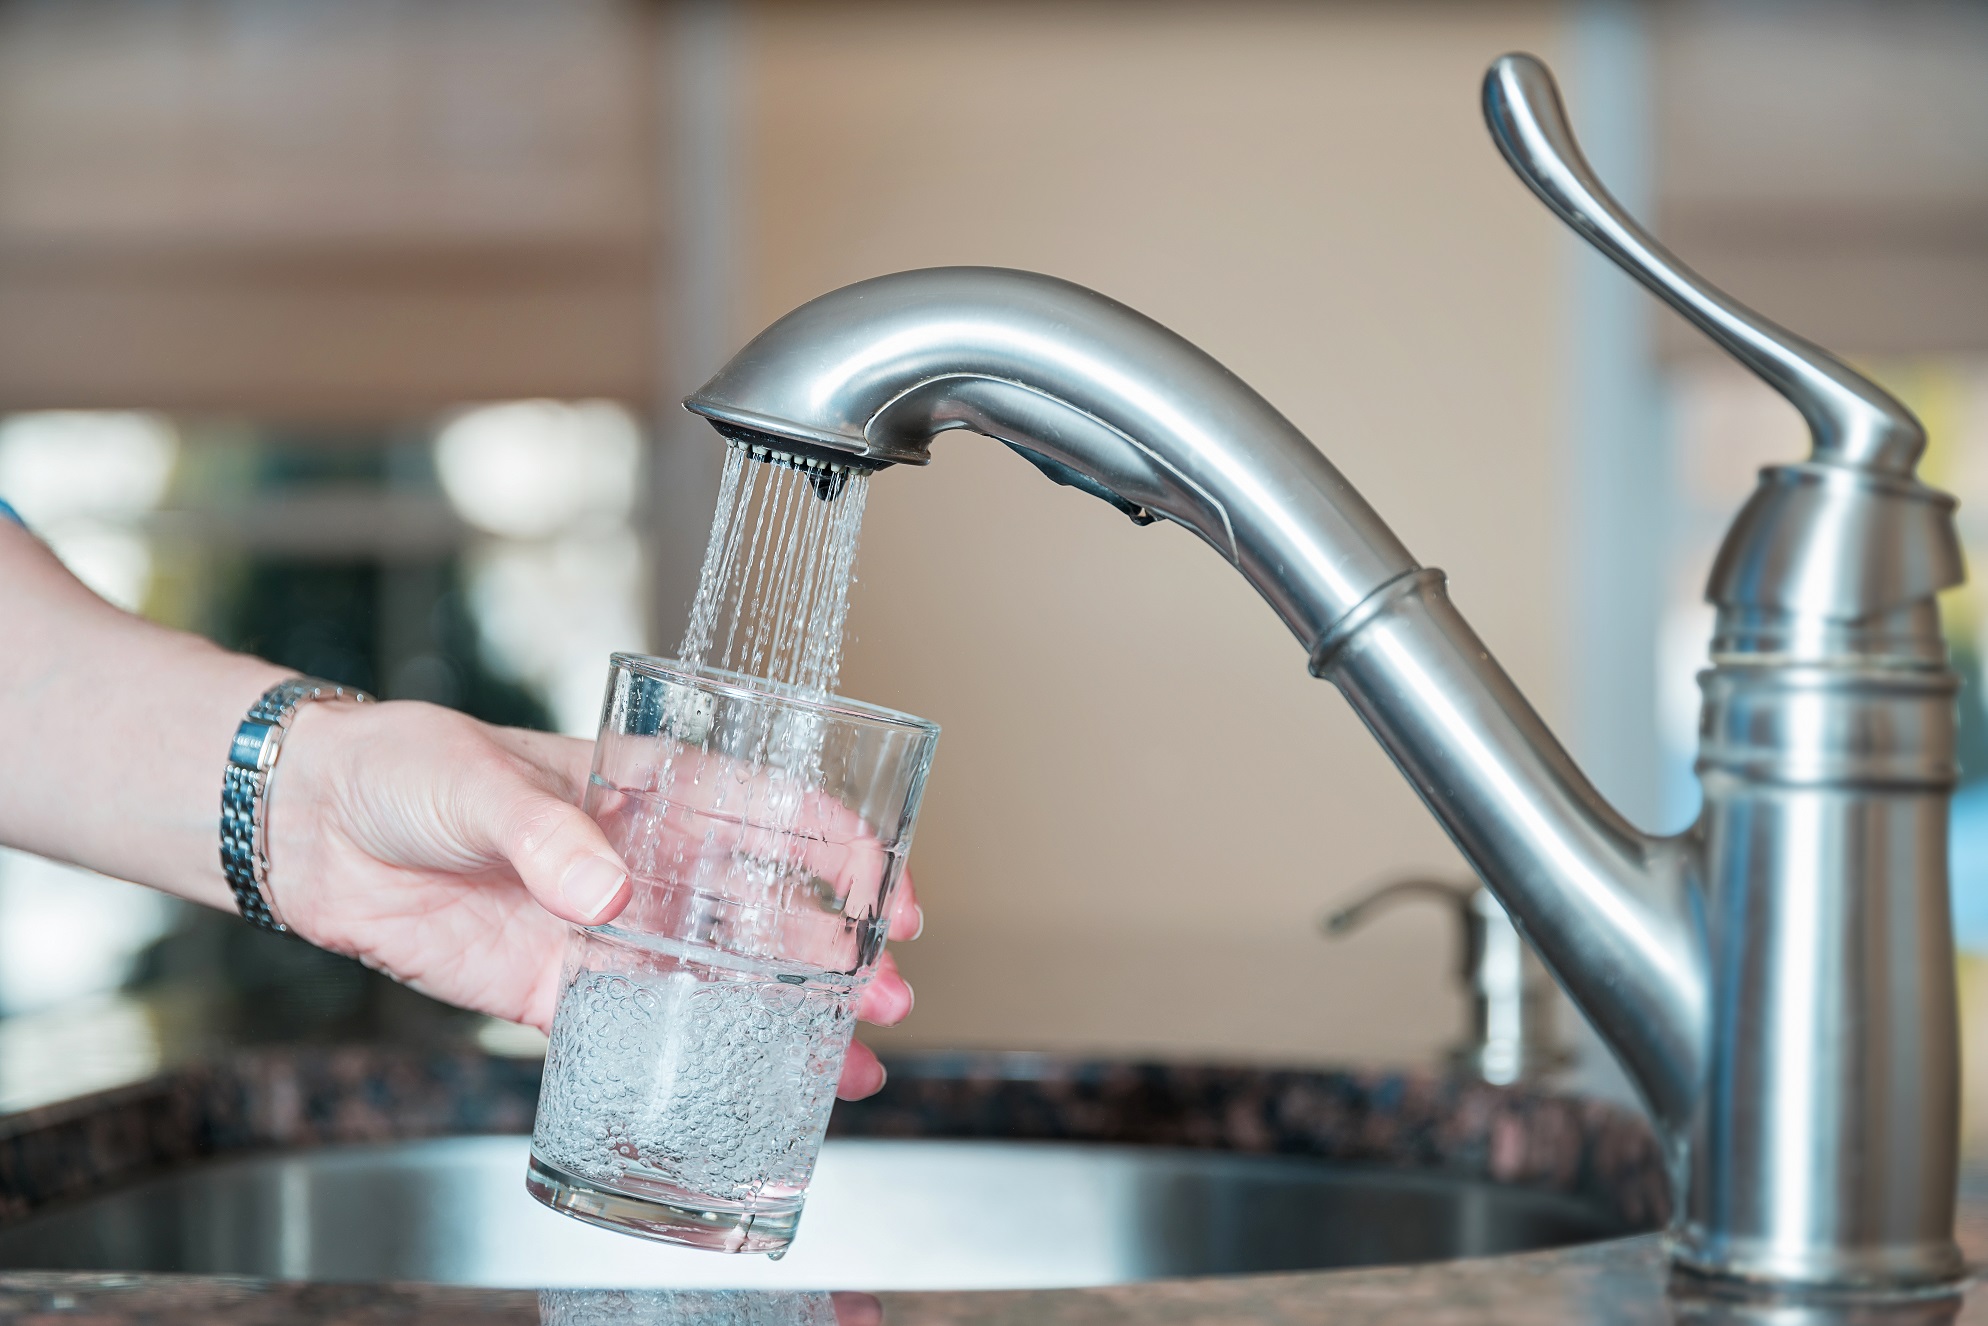 a woman's hand holding a clear glass beneath a running kitchen tap